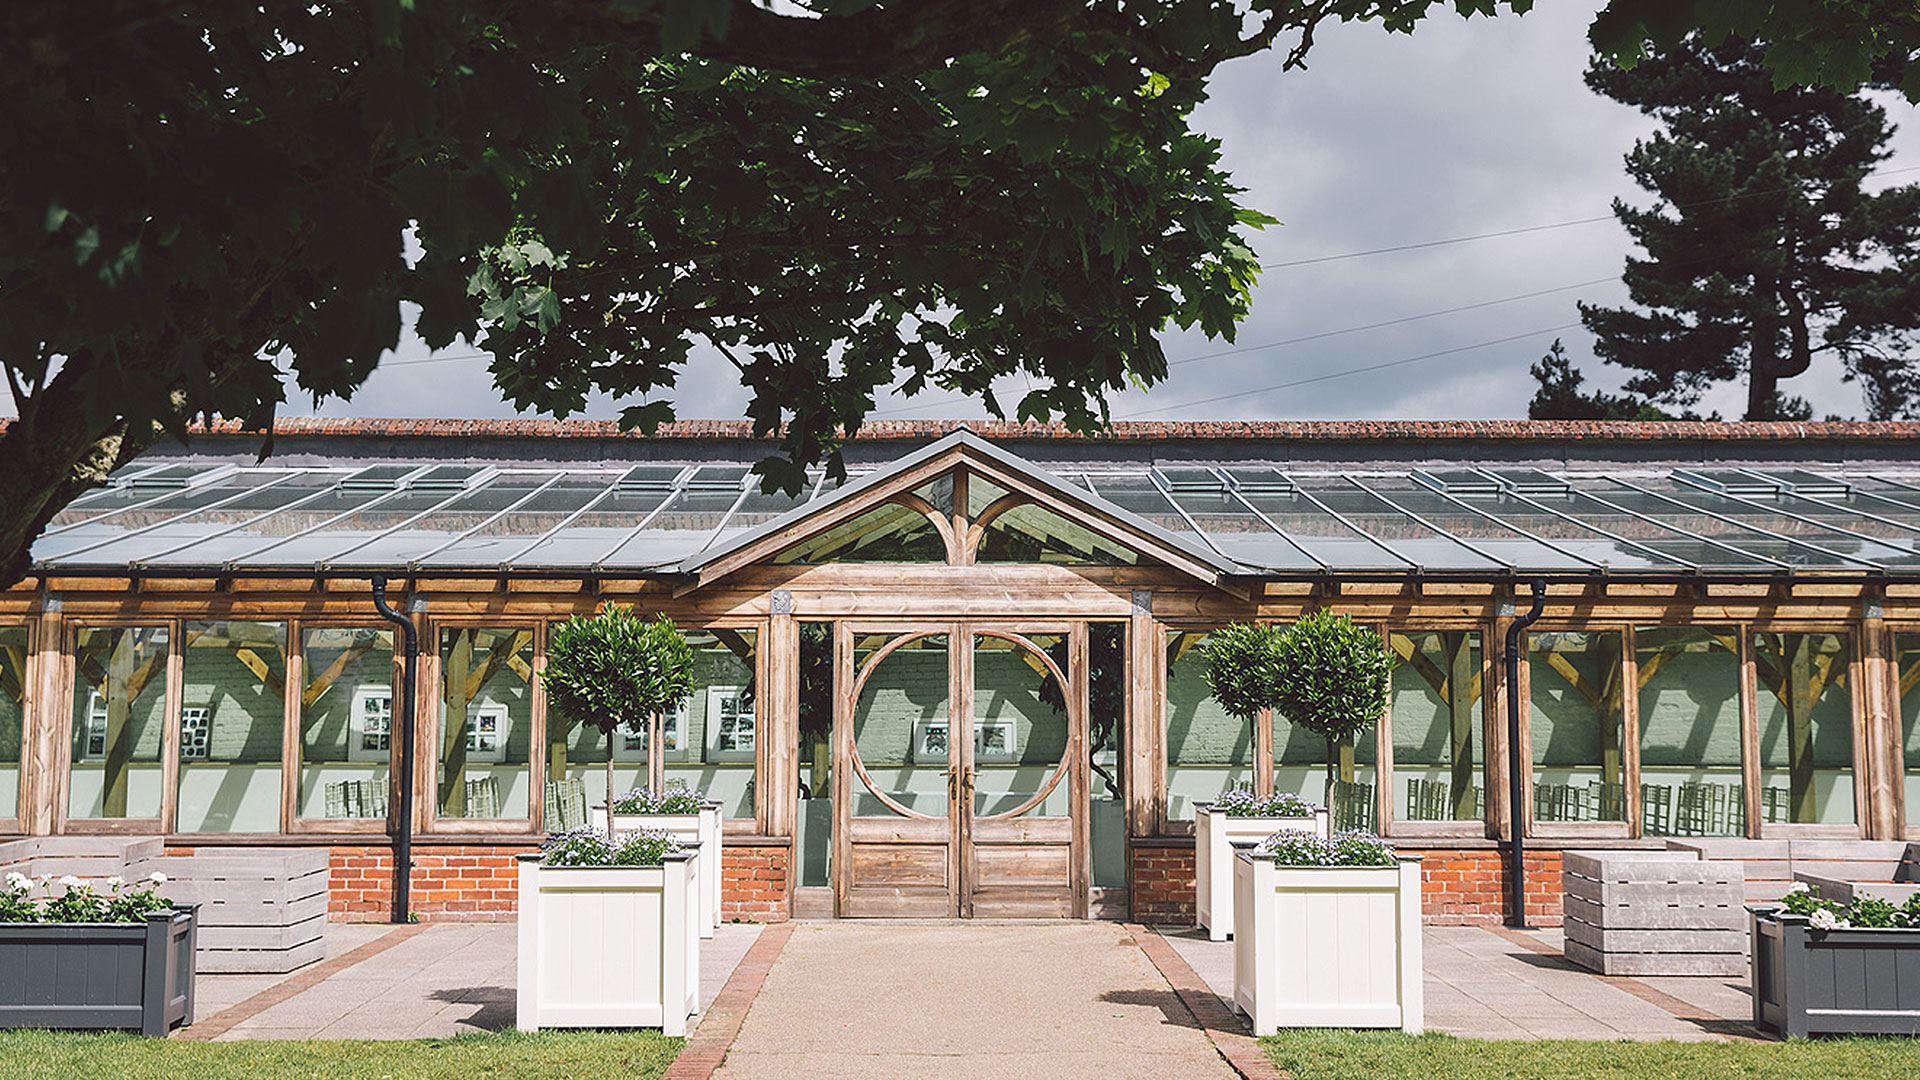 Up to 150 guests can be seated for an intimate wedding ceremony in the Orangery - Essex wedding venues